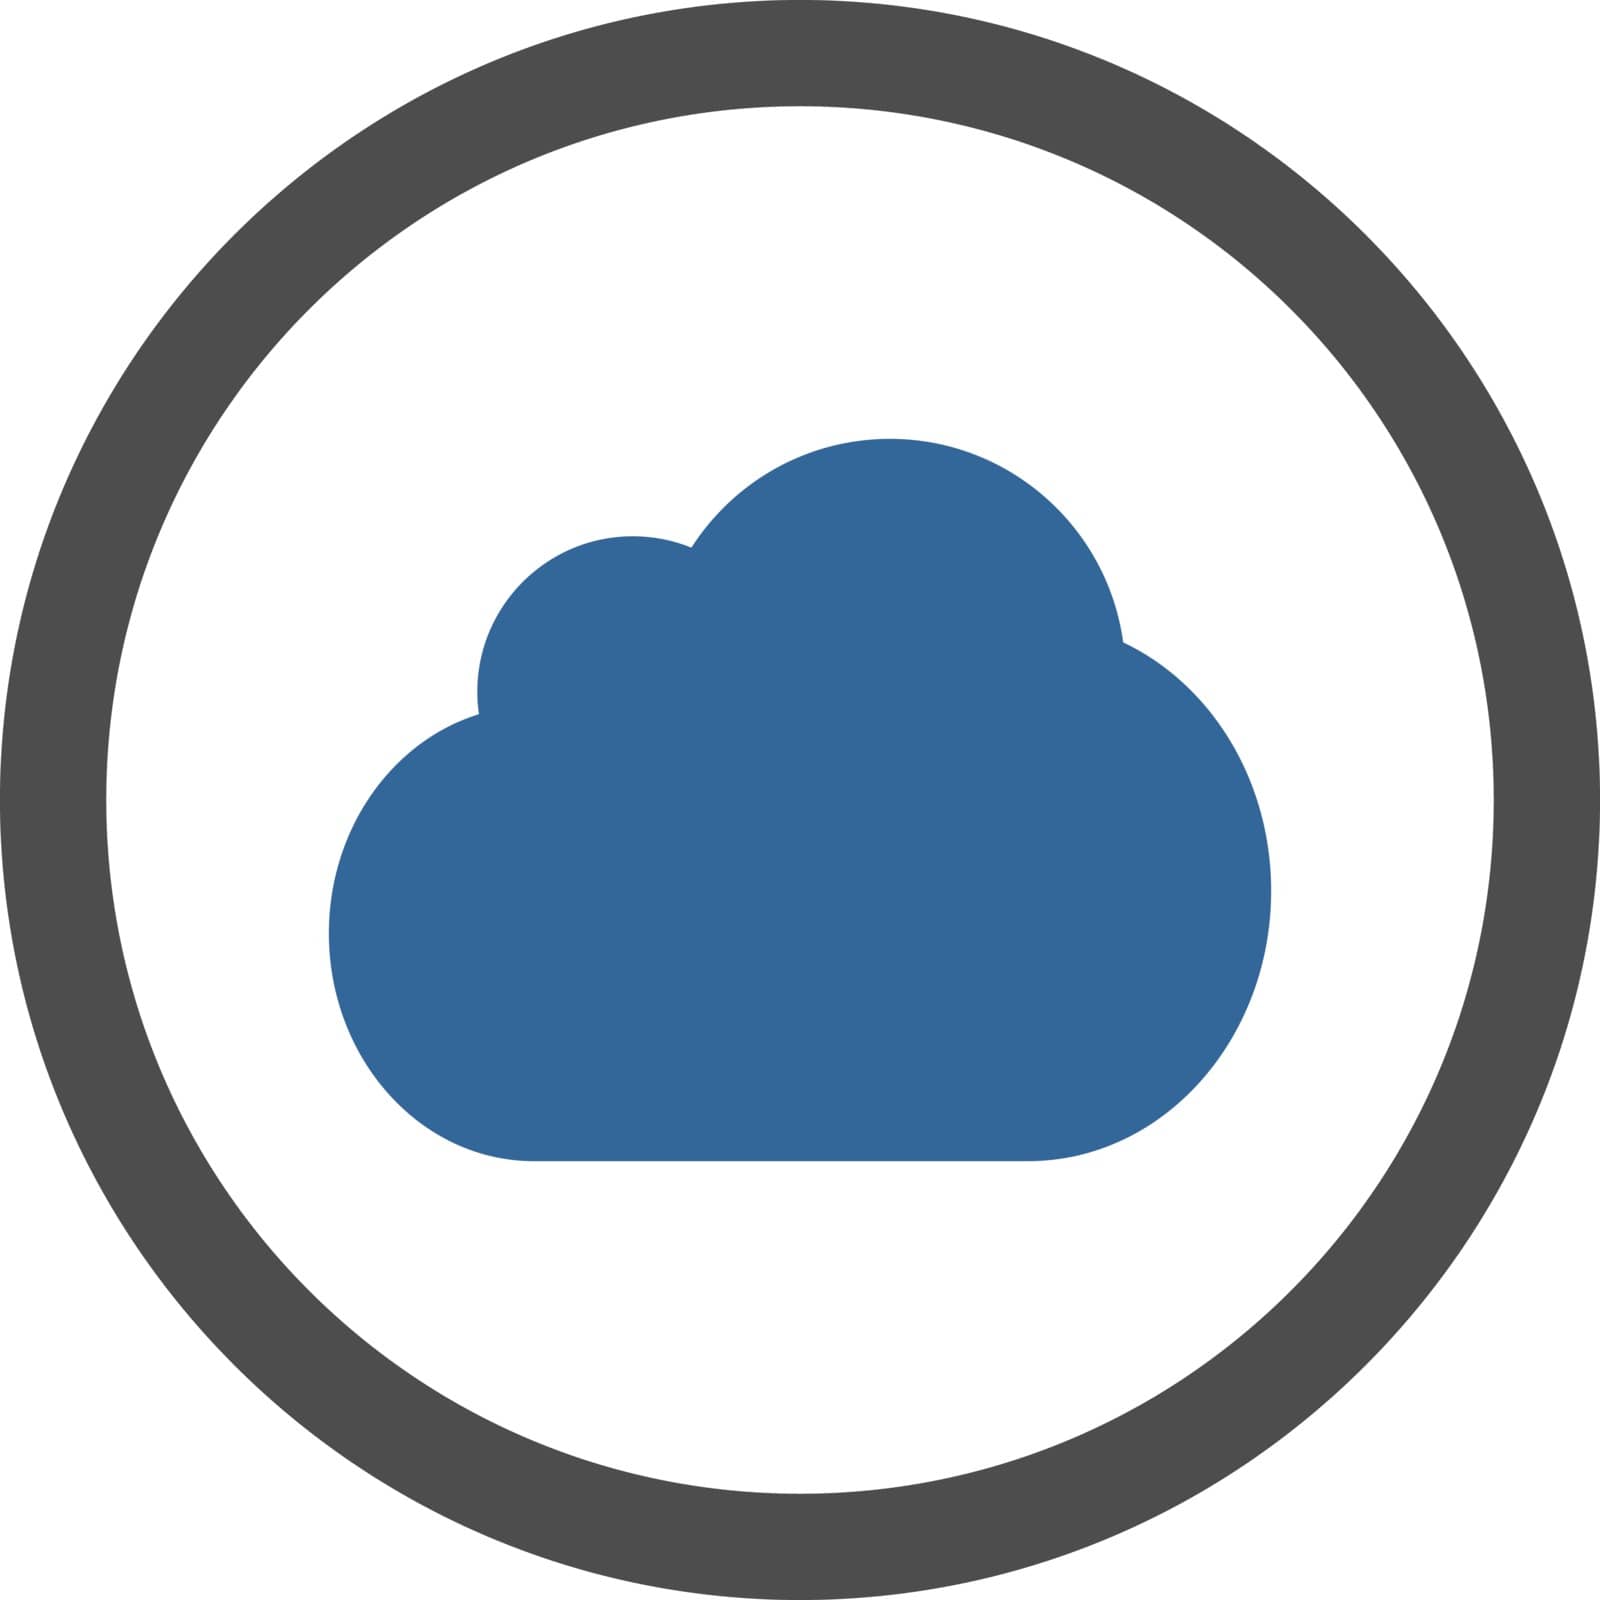 Cloud vector icon. This rounded flat symbol is drawn with cobalt and gray colors on a white background.